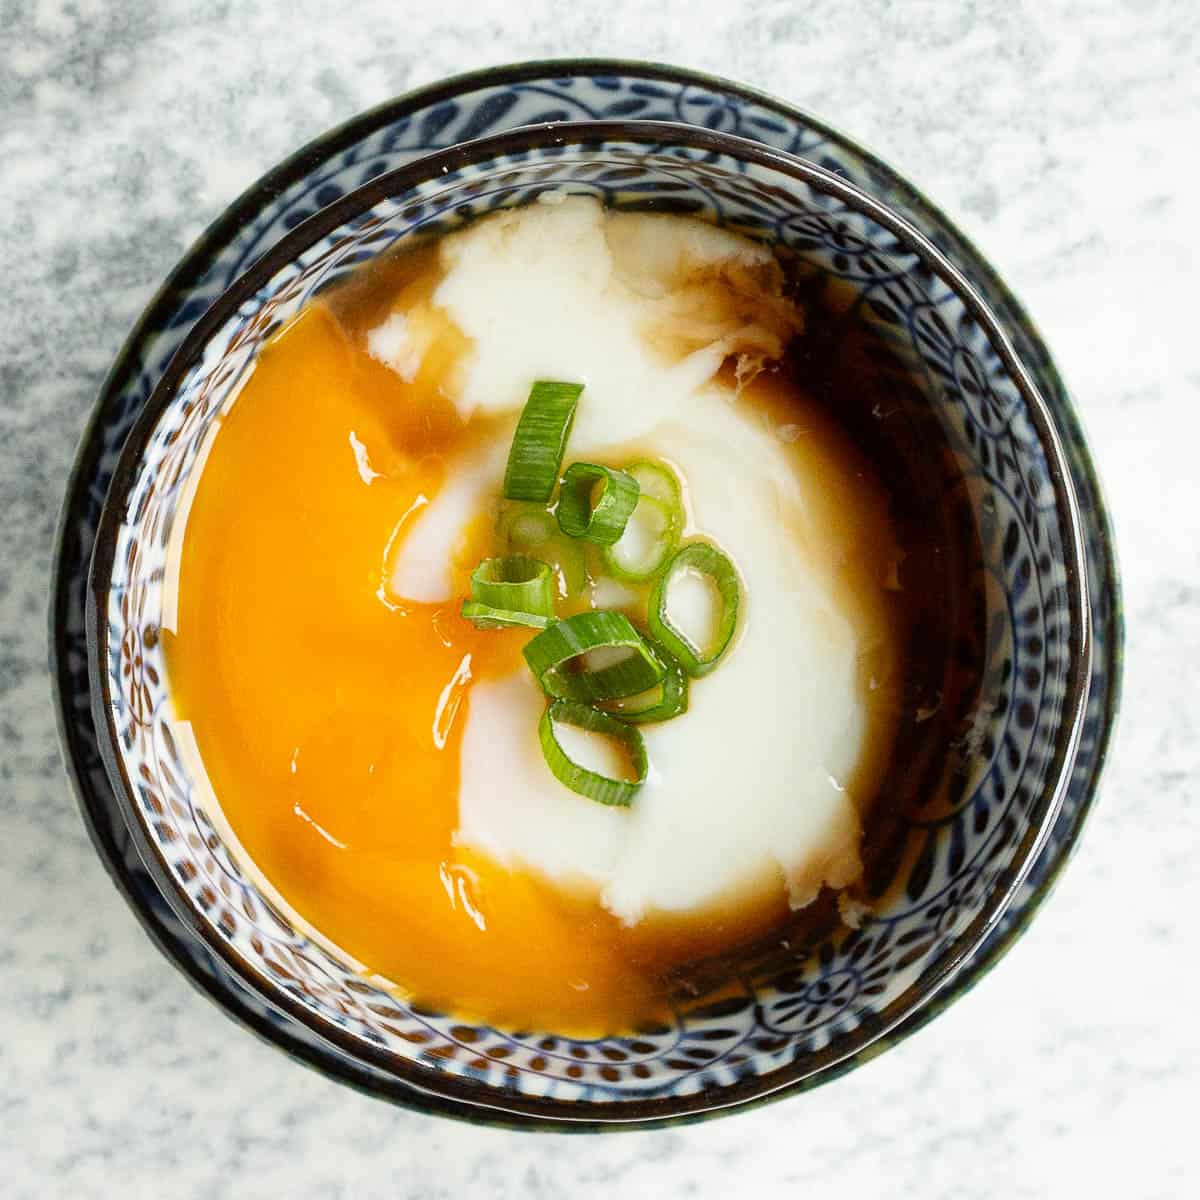 Onsen tamago in a blue bowl with golden yolk oozing out.